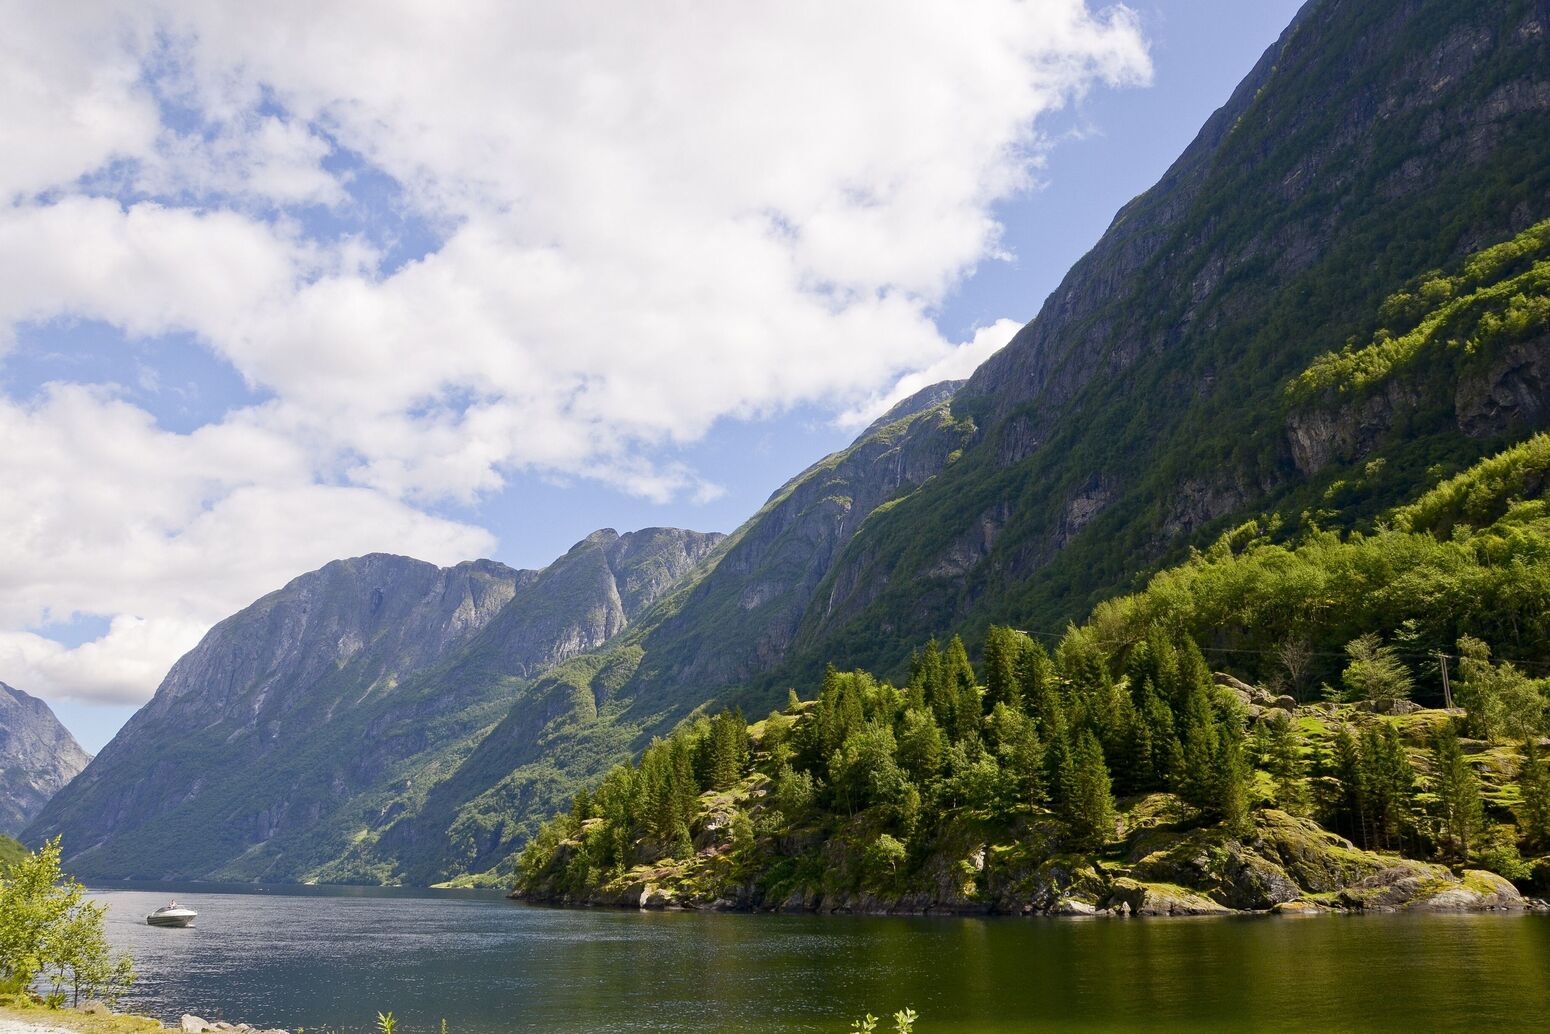 Destination, Sognefjord, Flaam, Norway, Northern Europe, excursion, nature, sky, mountain, fjord